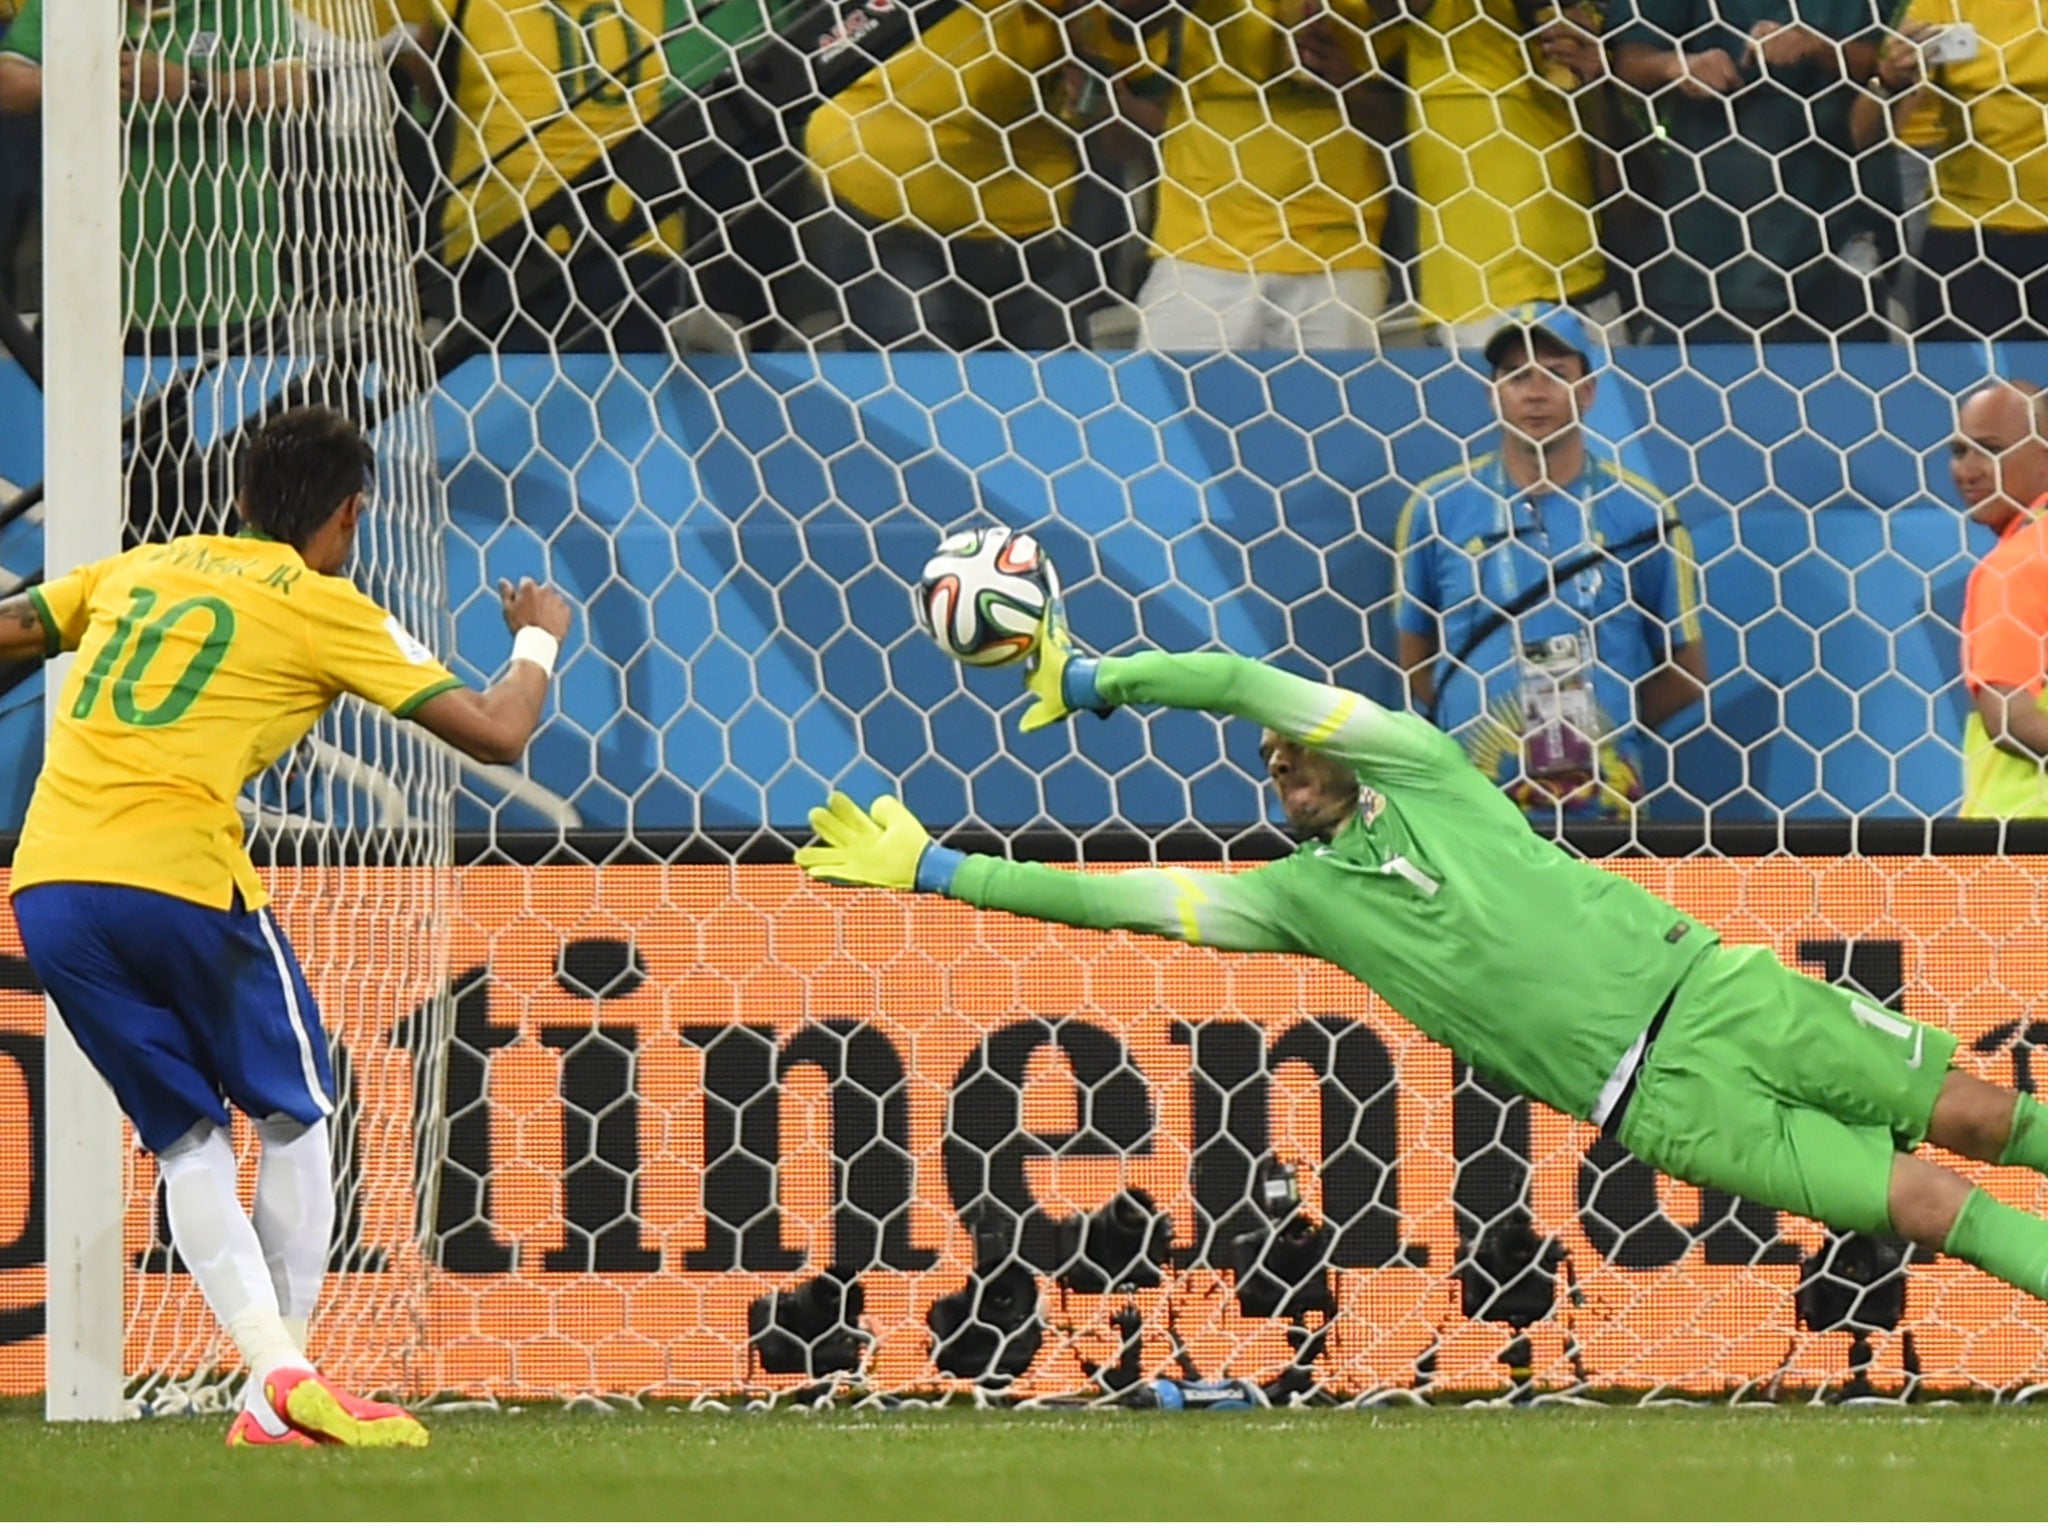 Neymar scores from the spot to put Brazil 2-1 up